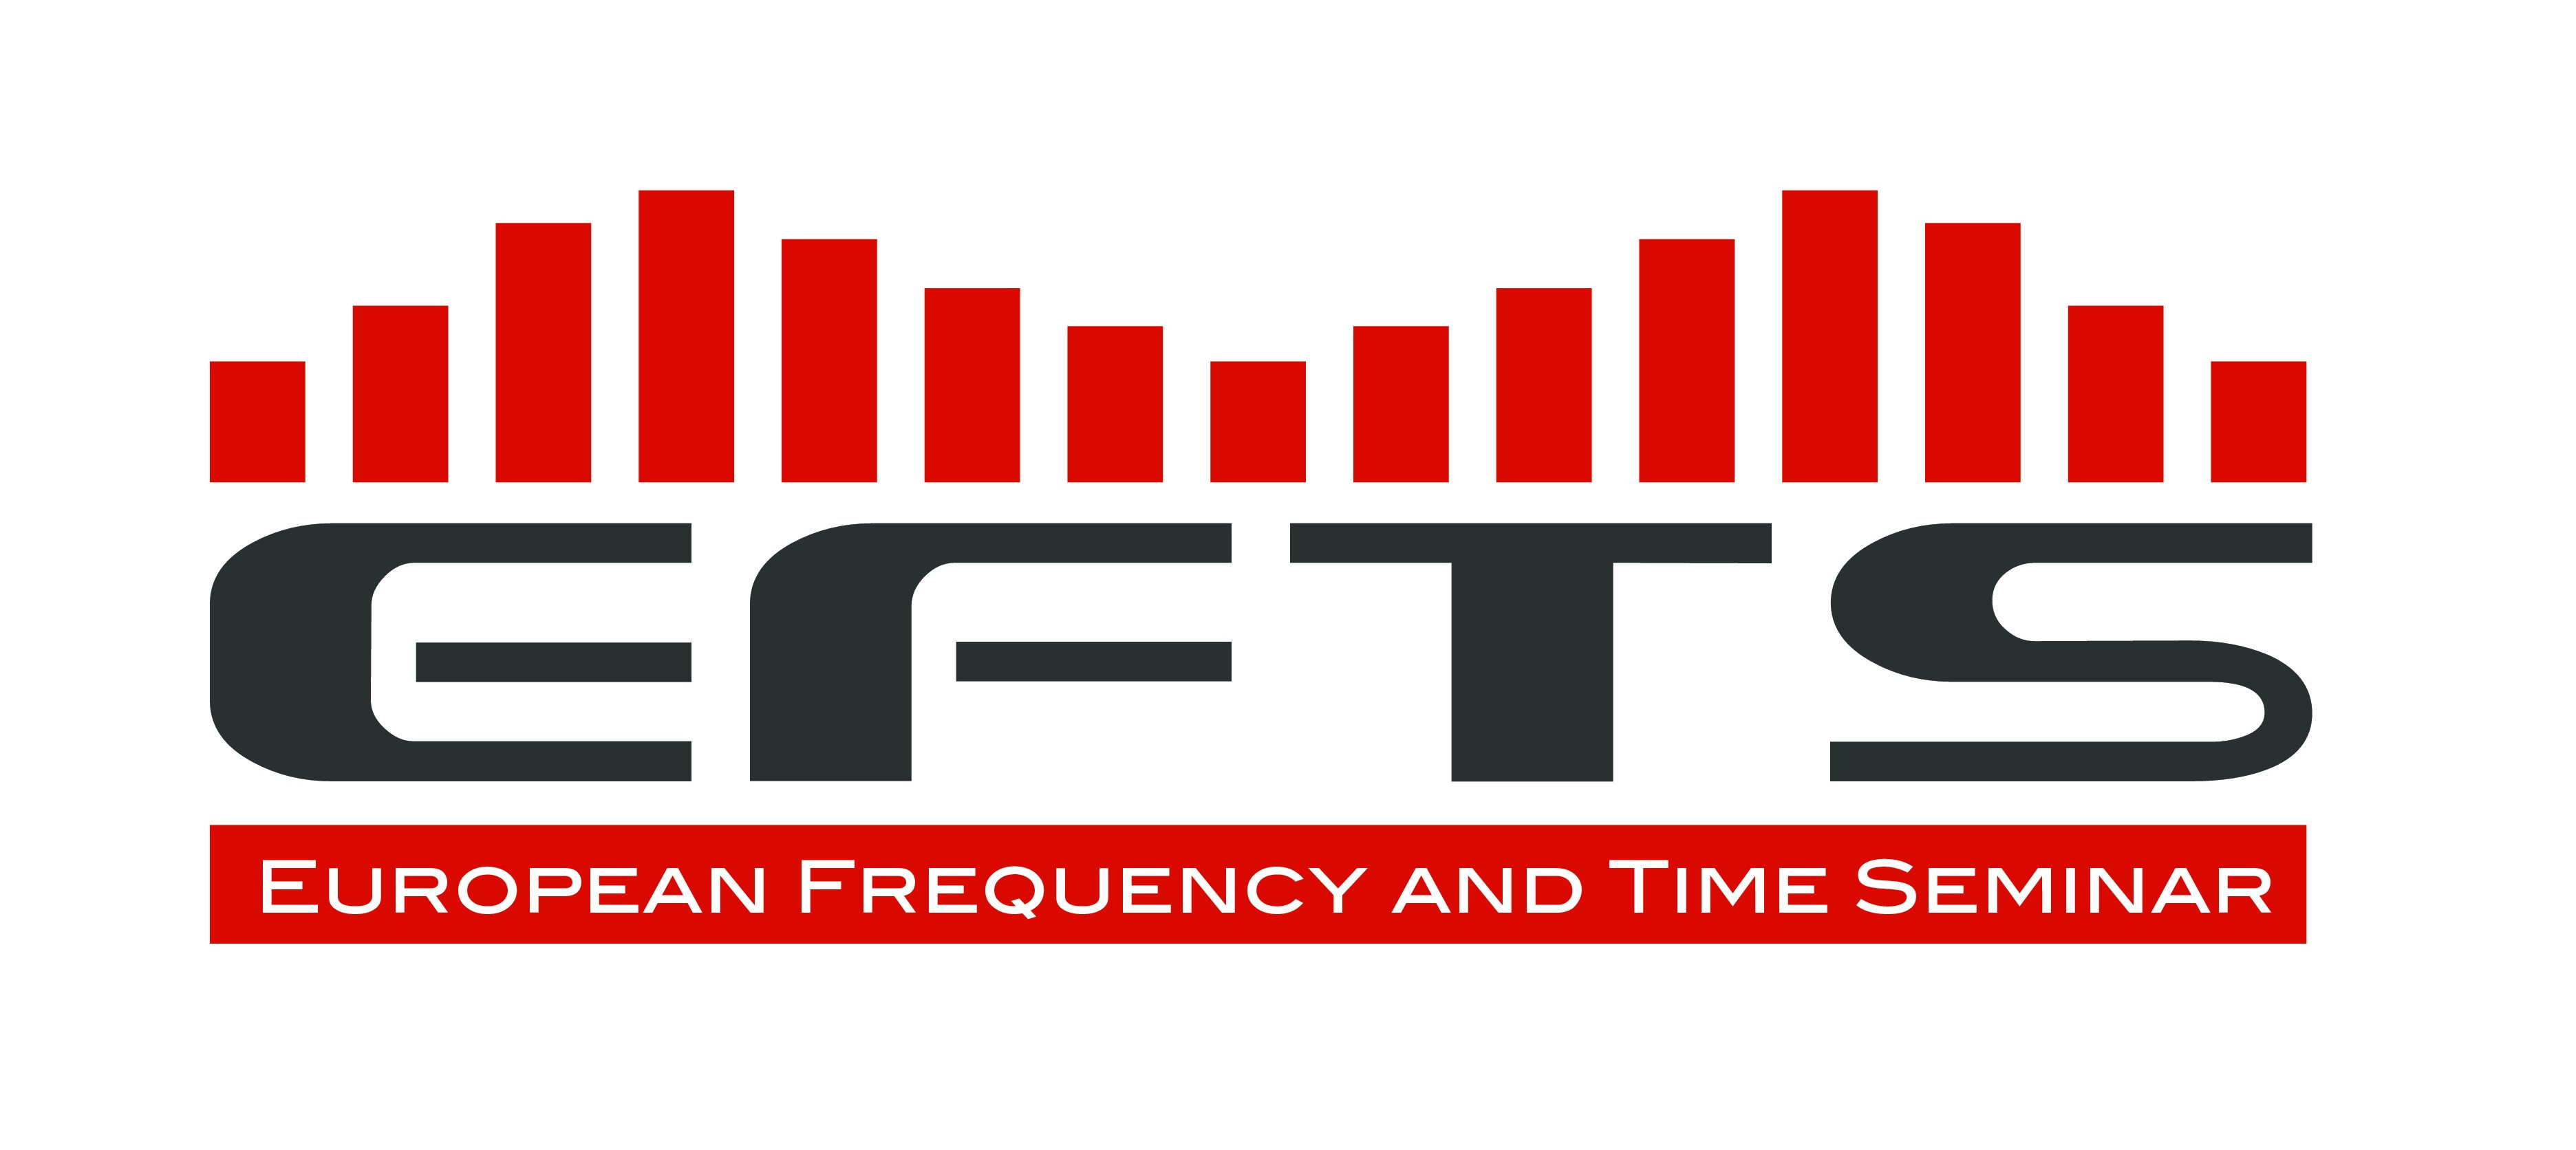 European Frequency and Time Seminar